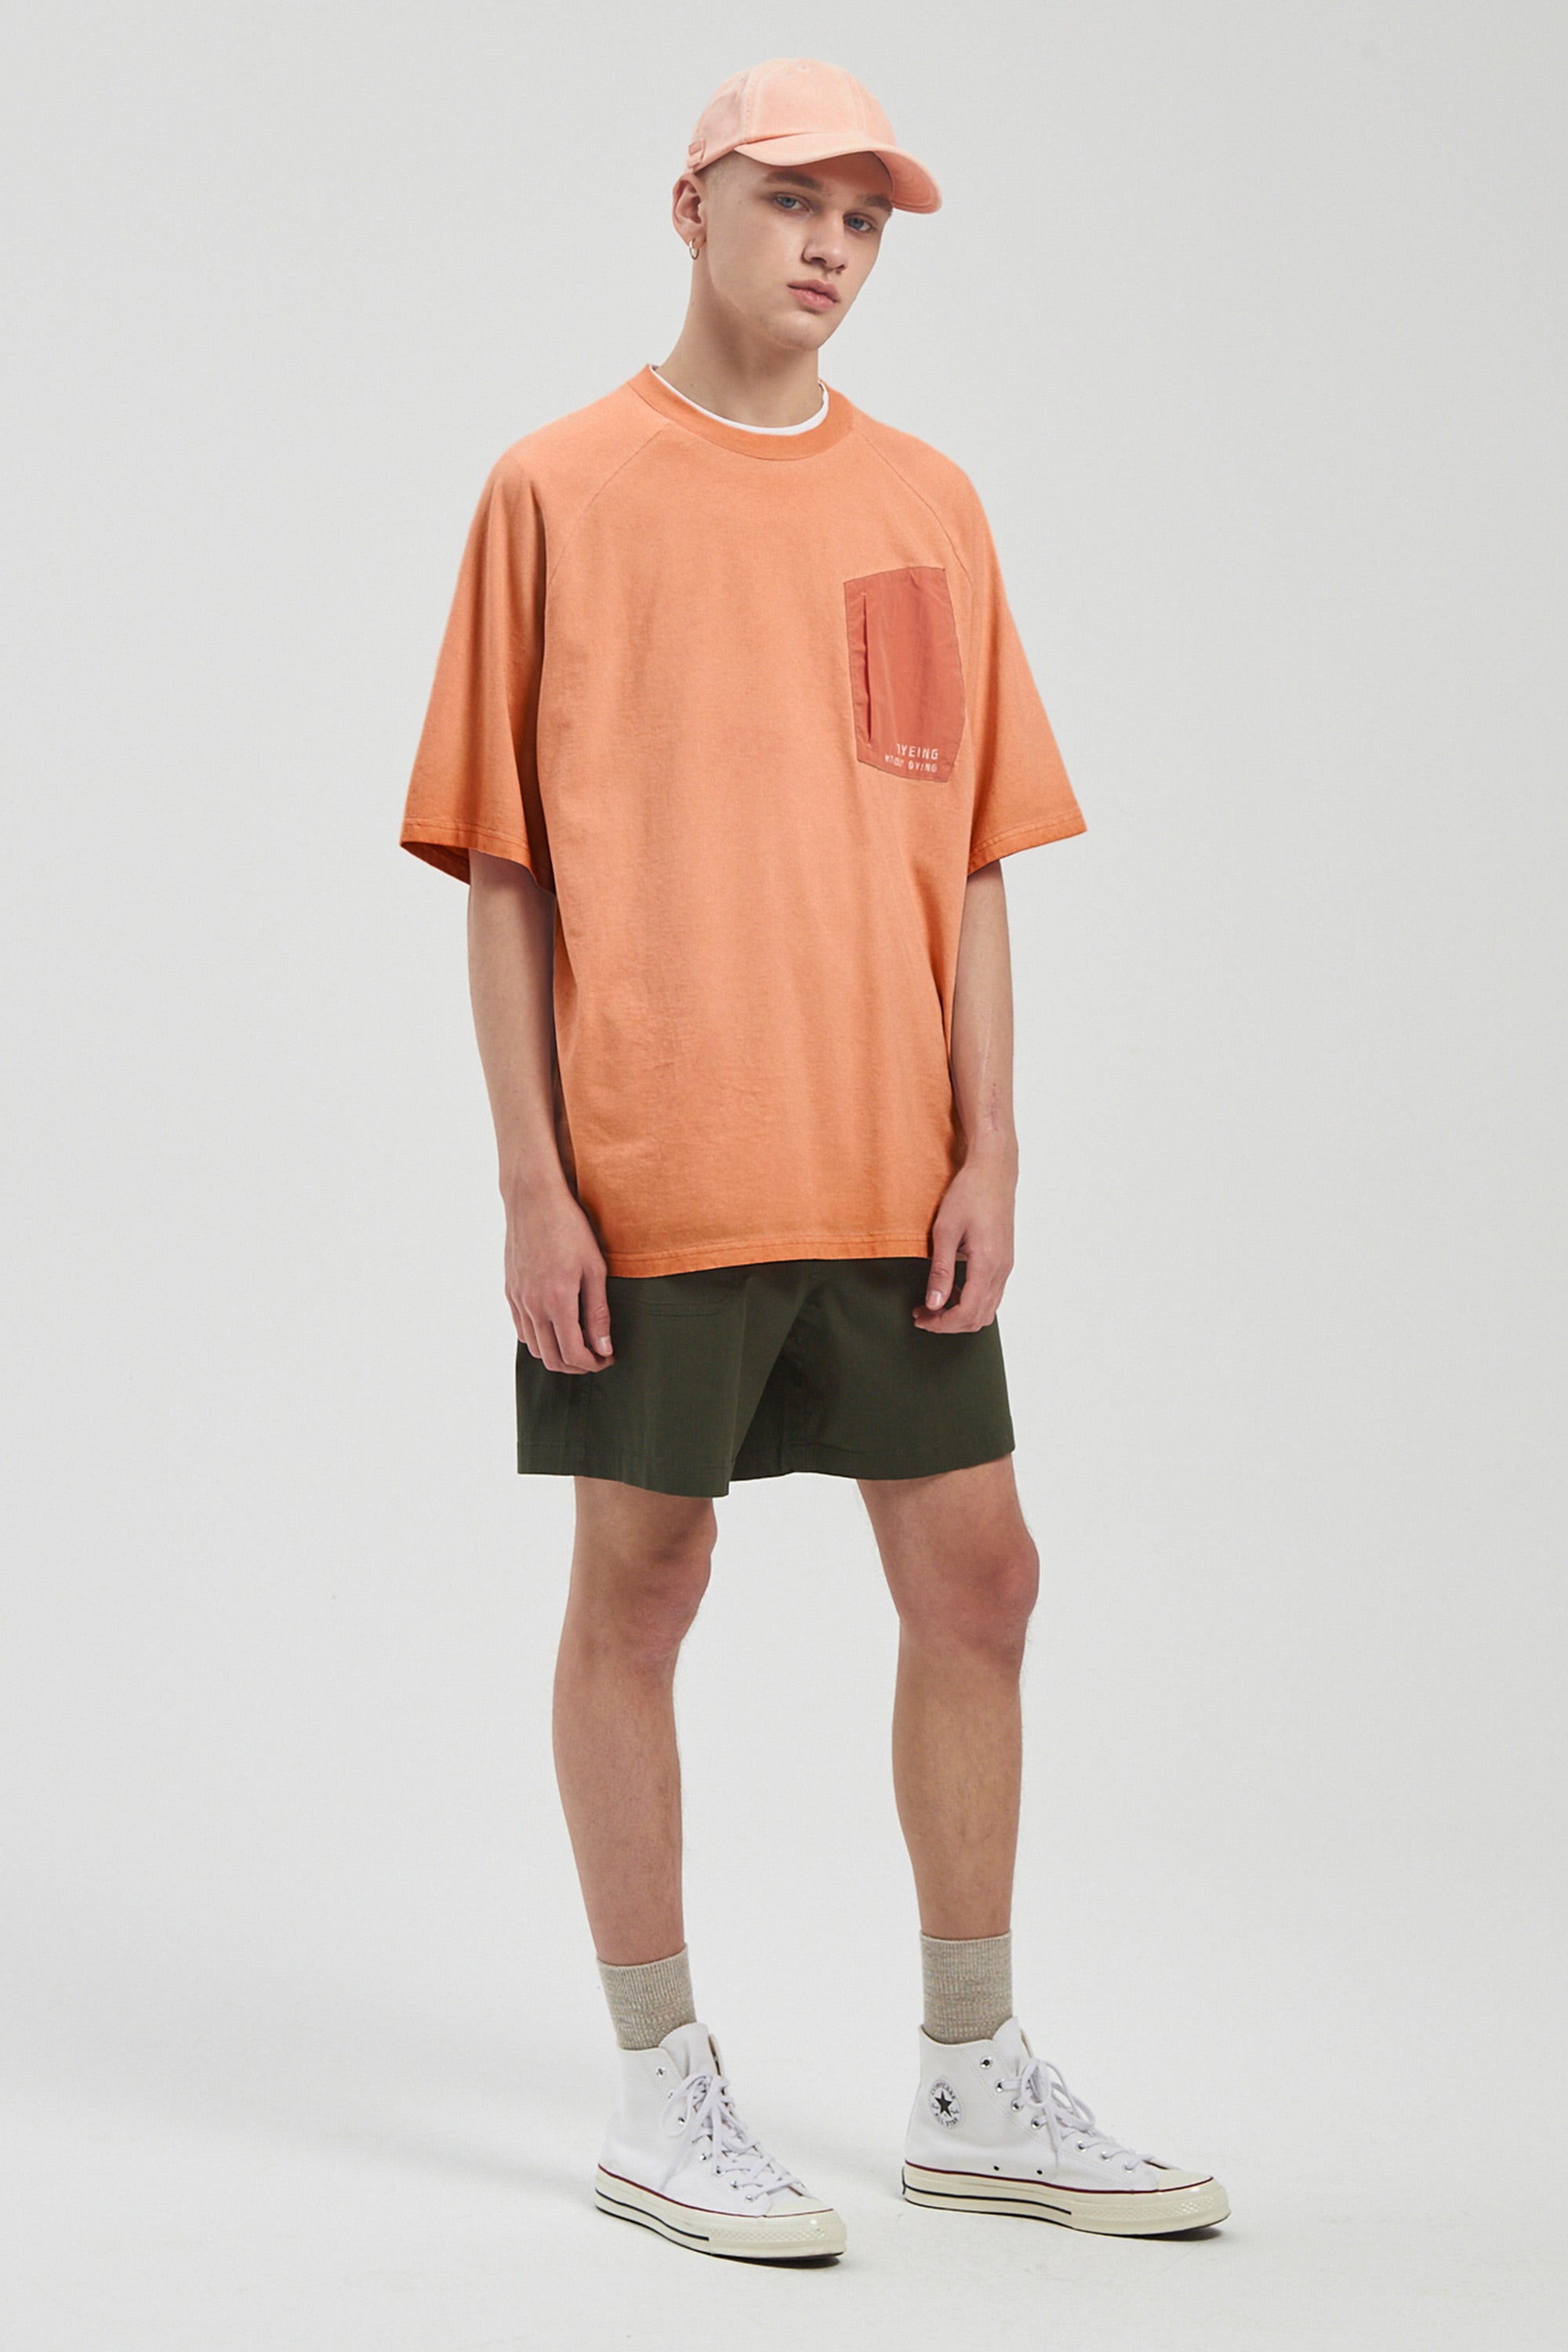 Woven Patched T-Shirt - Coral Sand